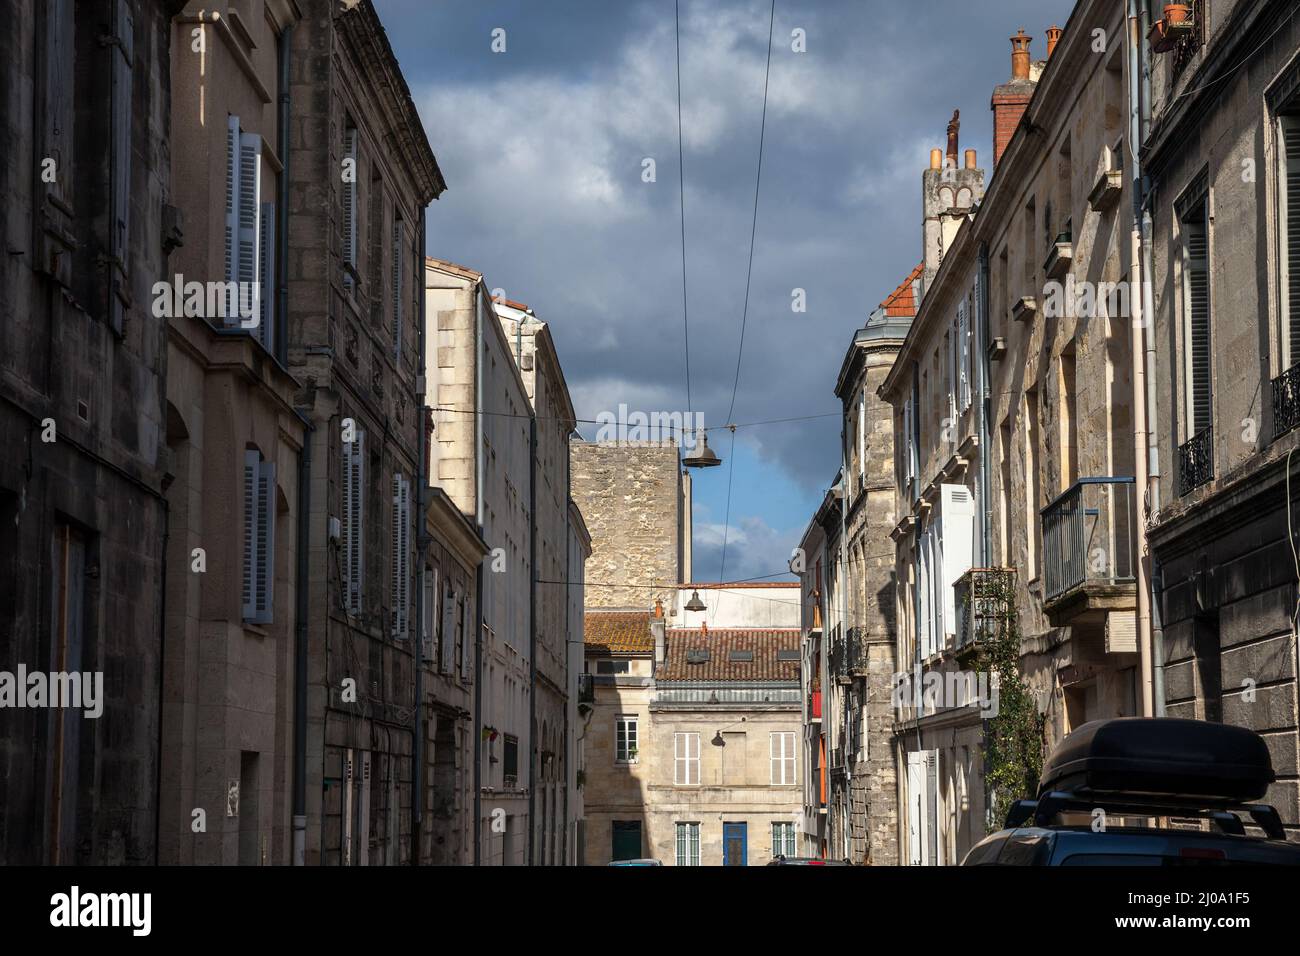 Selective blur on typical bordeaux buildings called echoppes bordelaises in a typical french city street in the historical center of Bordeaux, France, Stock Photo